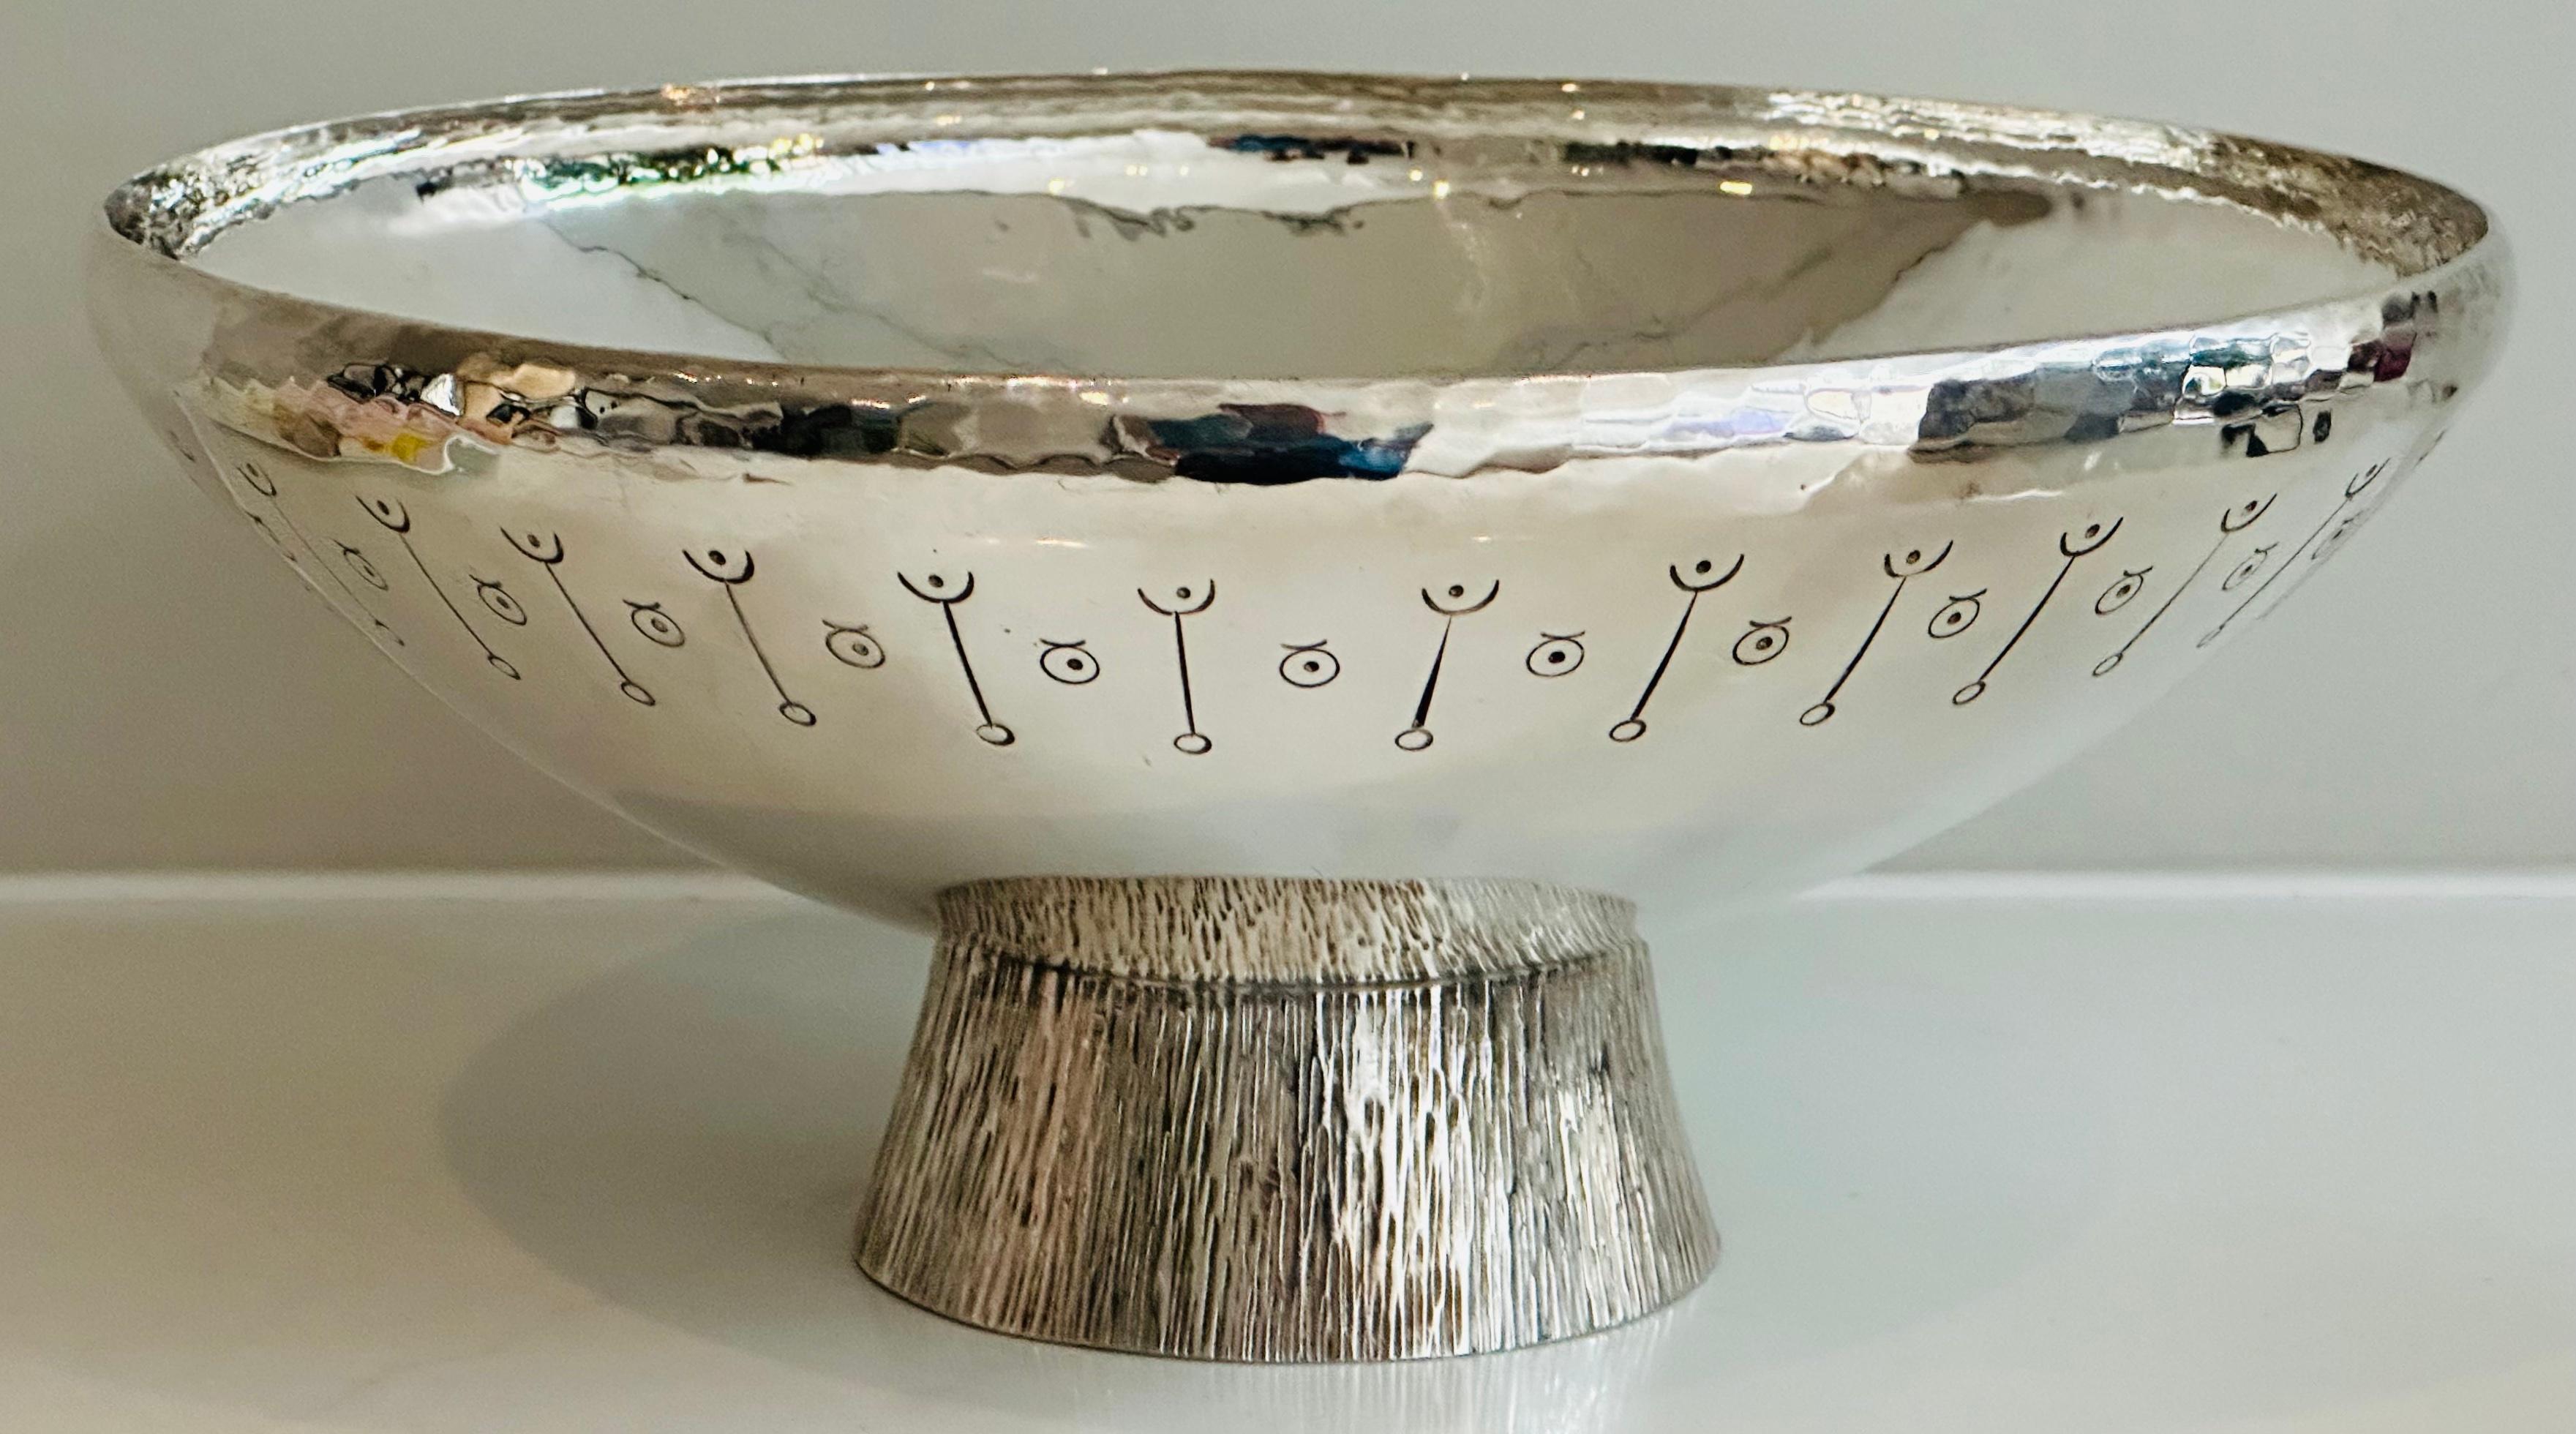 1980s English Silver Plated Decorative Hand-Hammered Serving or Display Bowl 4